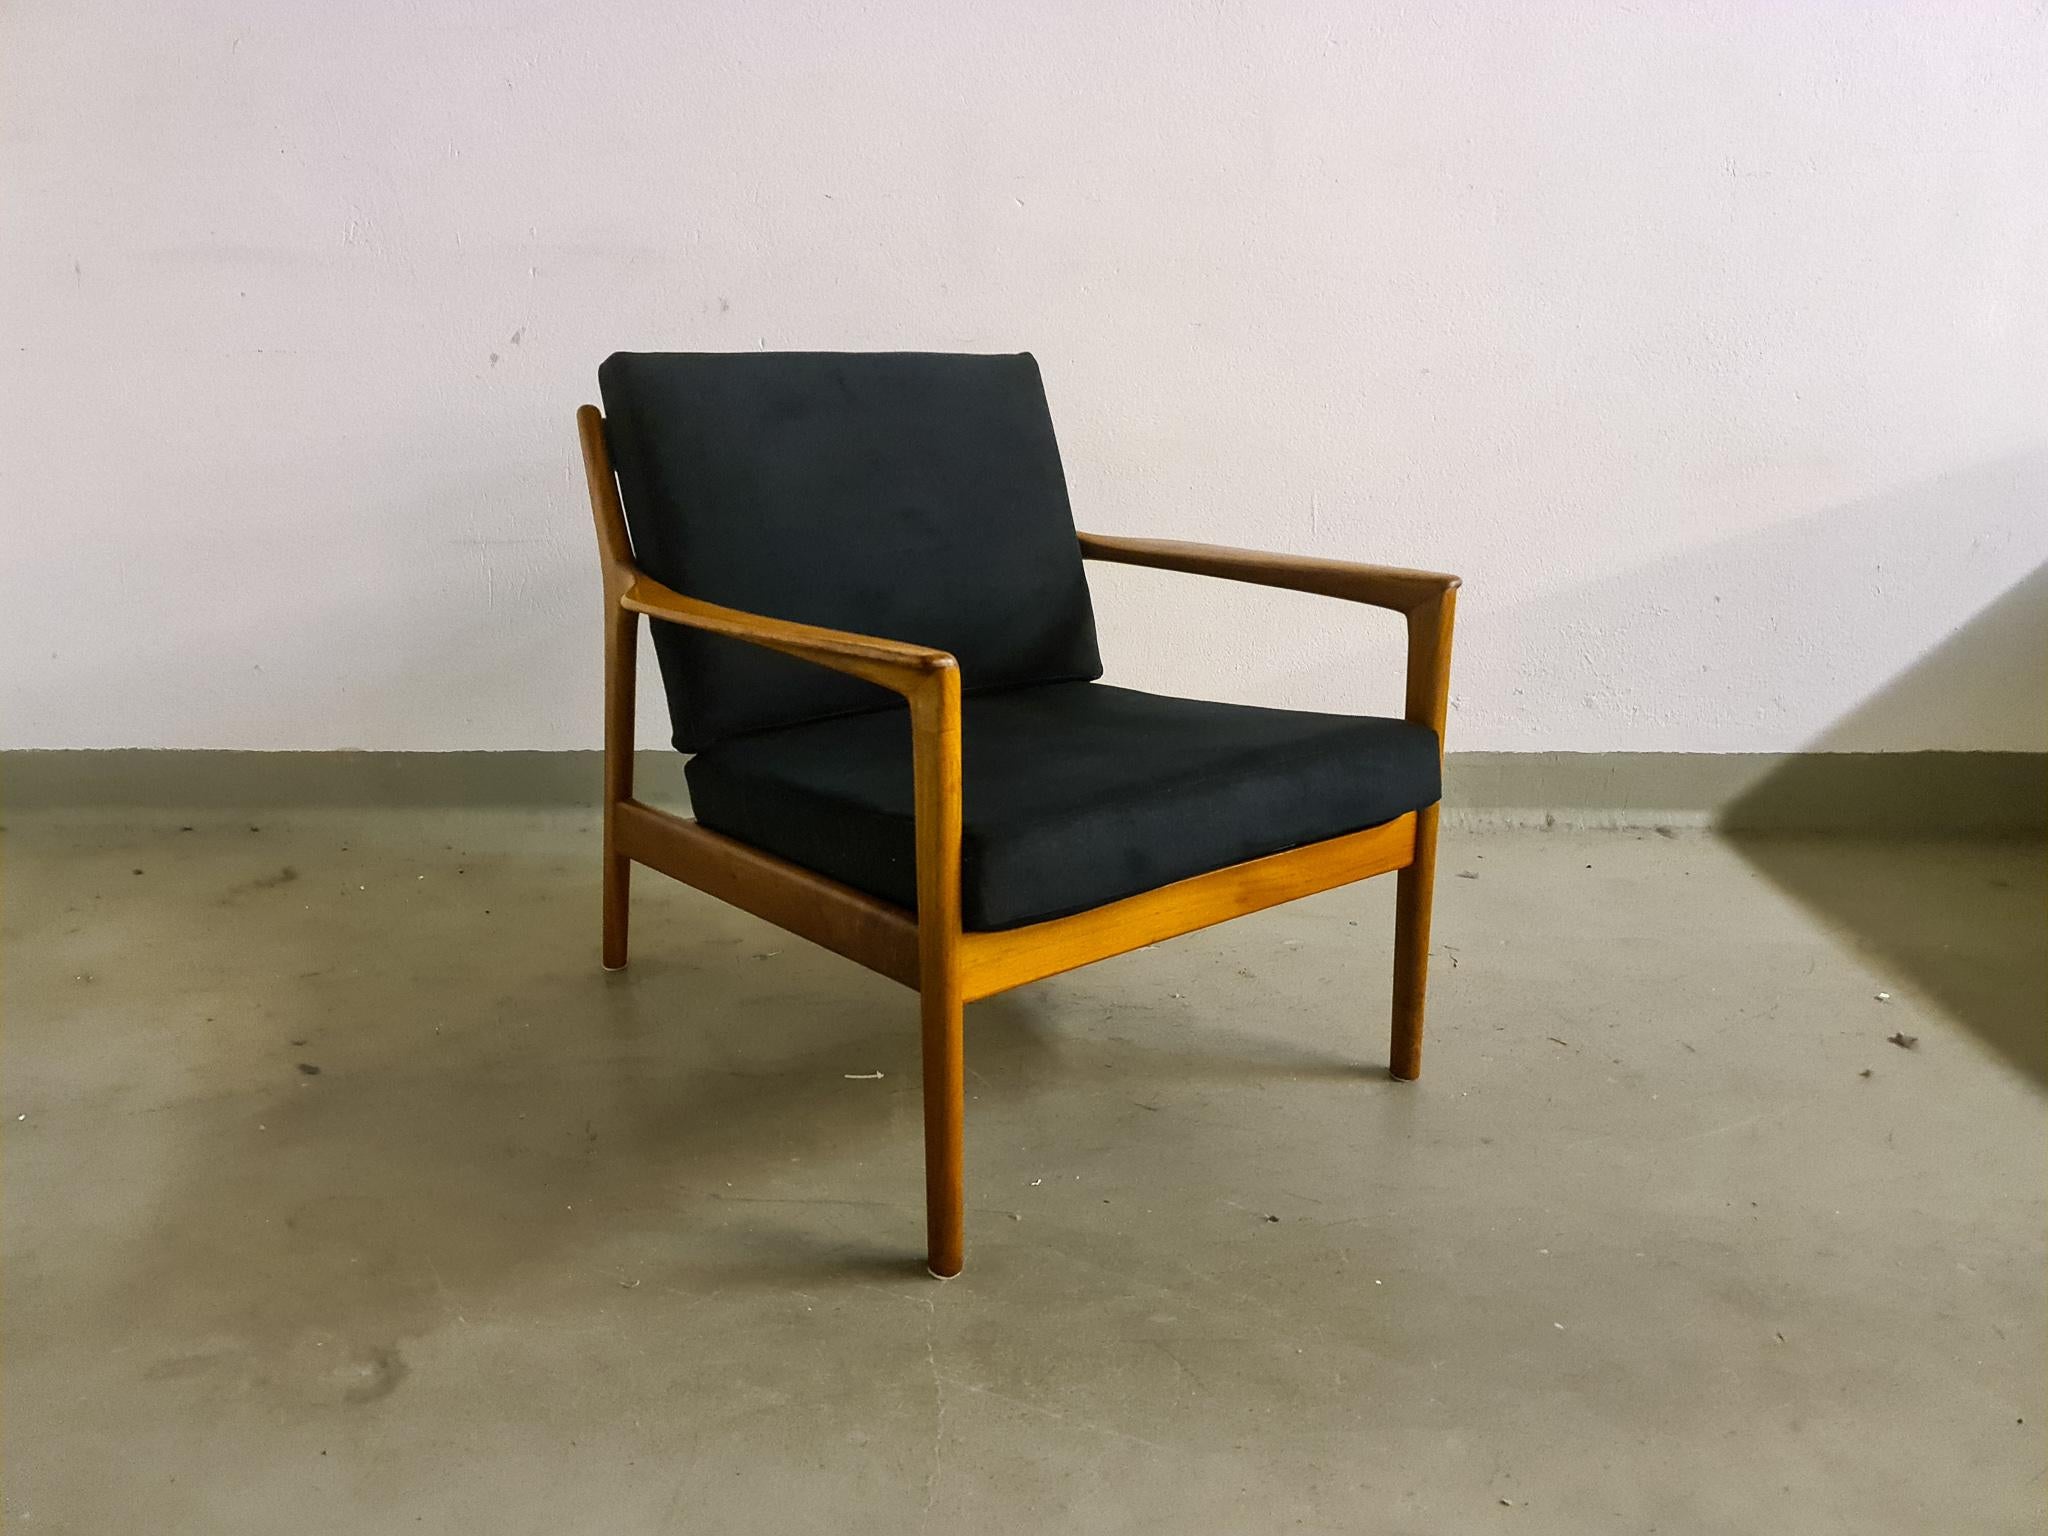 A vintage Mid-Century Modern Swedish easy chair made of walnut, designed by Folke Ohlsson and produced by DUX.
The structure of the sofa is made with elegant lines to look good from all directions. New upholstery in good quality Swedish textile.